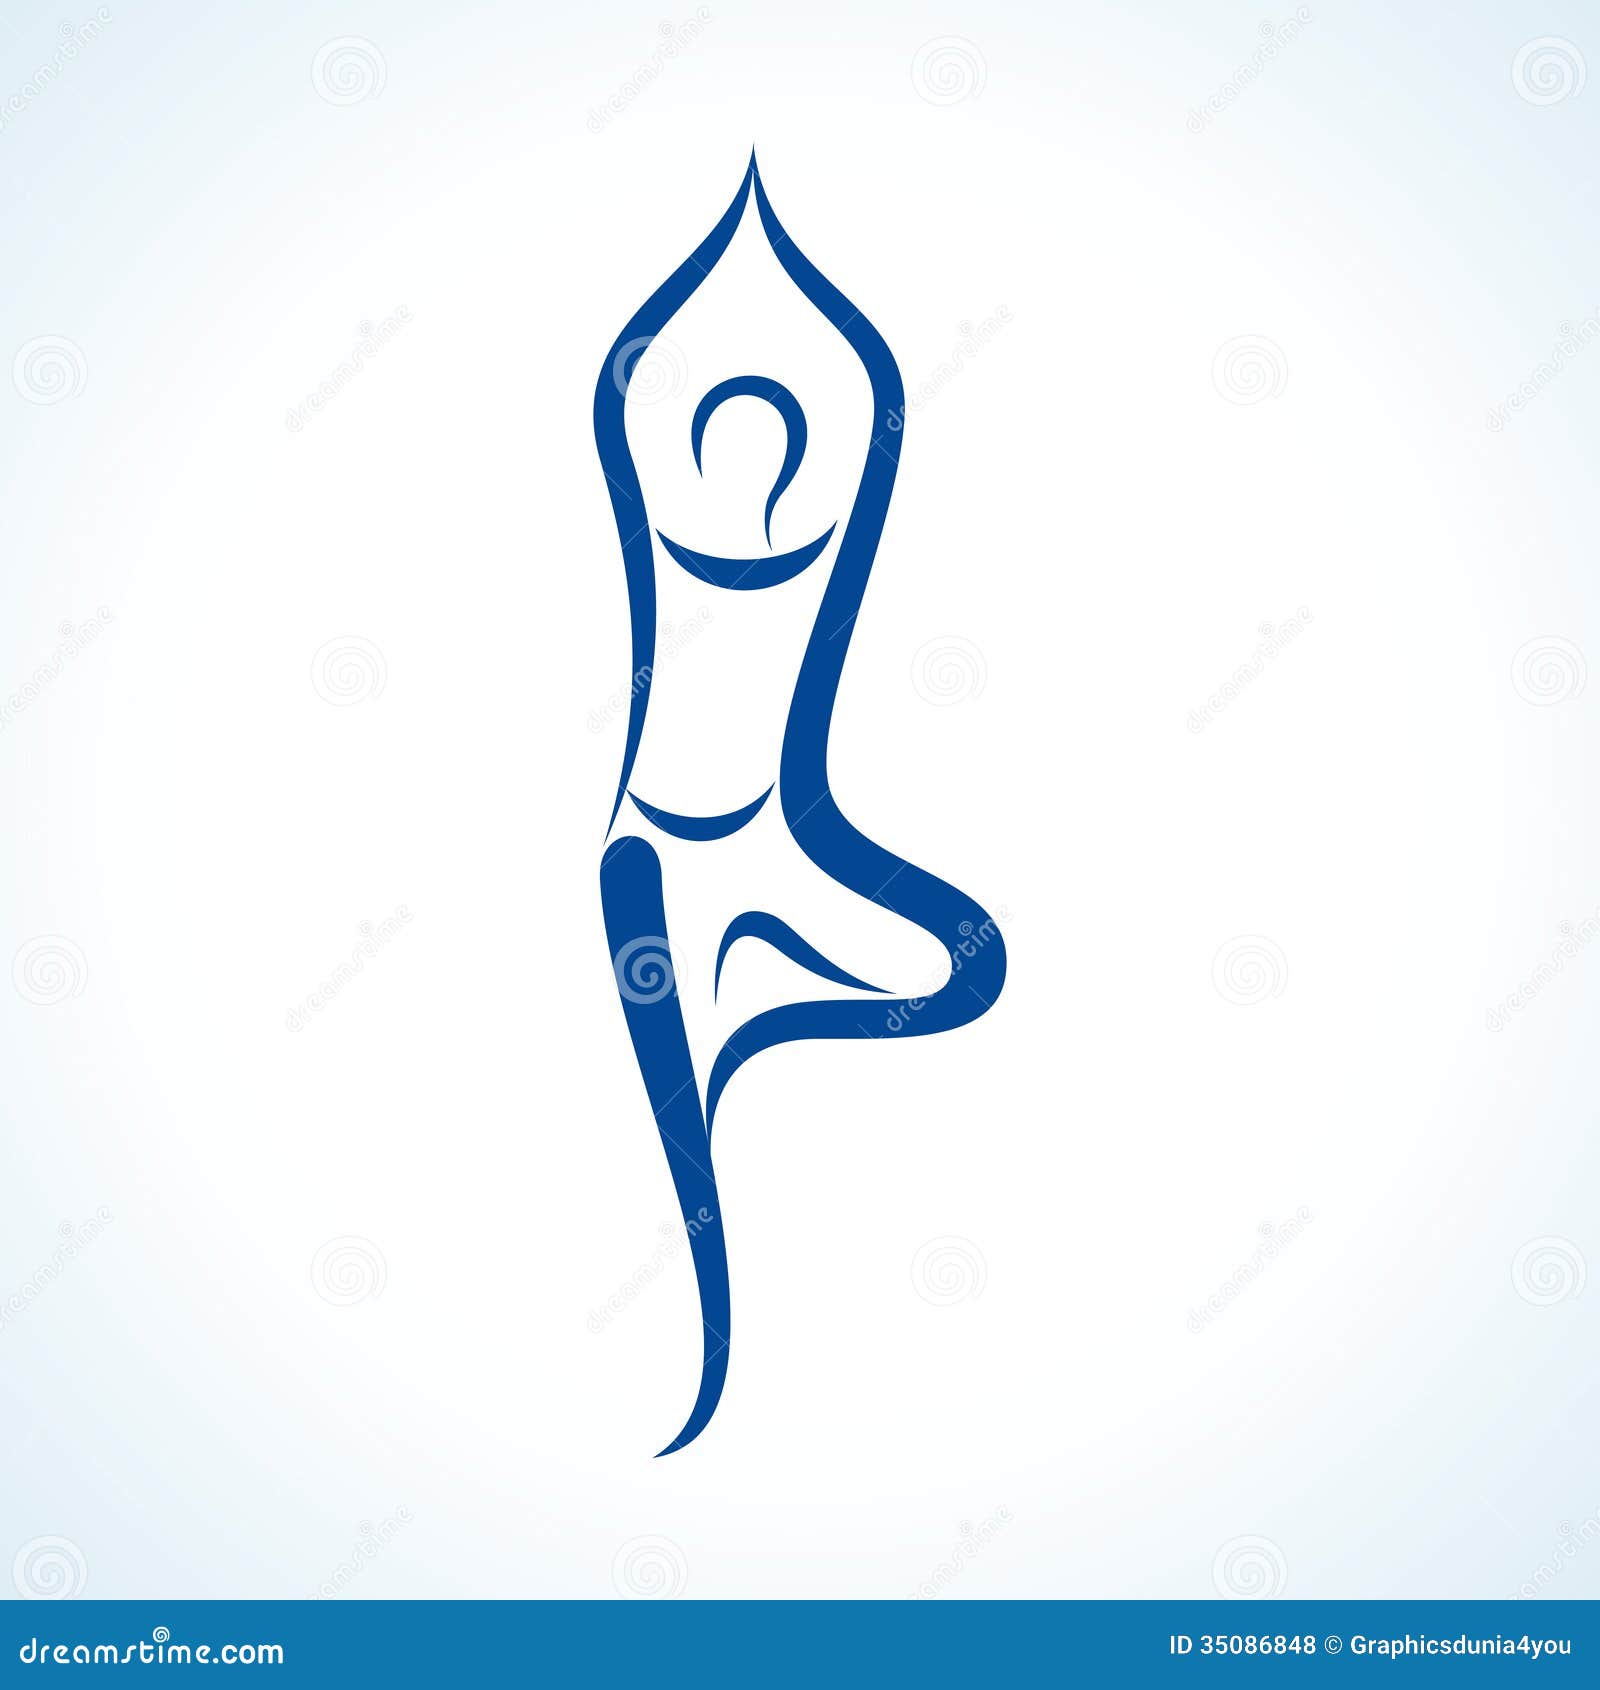 free yoga clipart images - photo #45